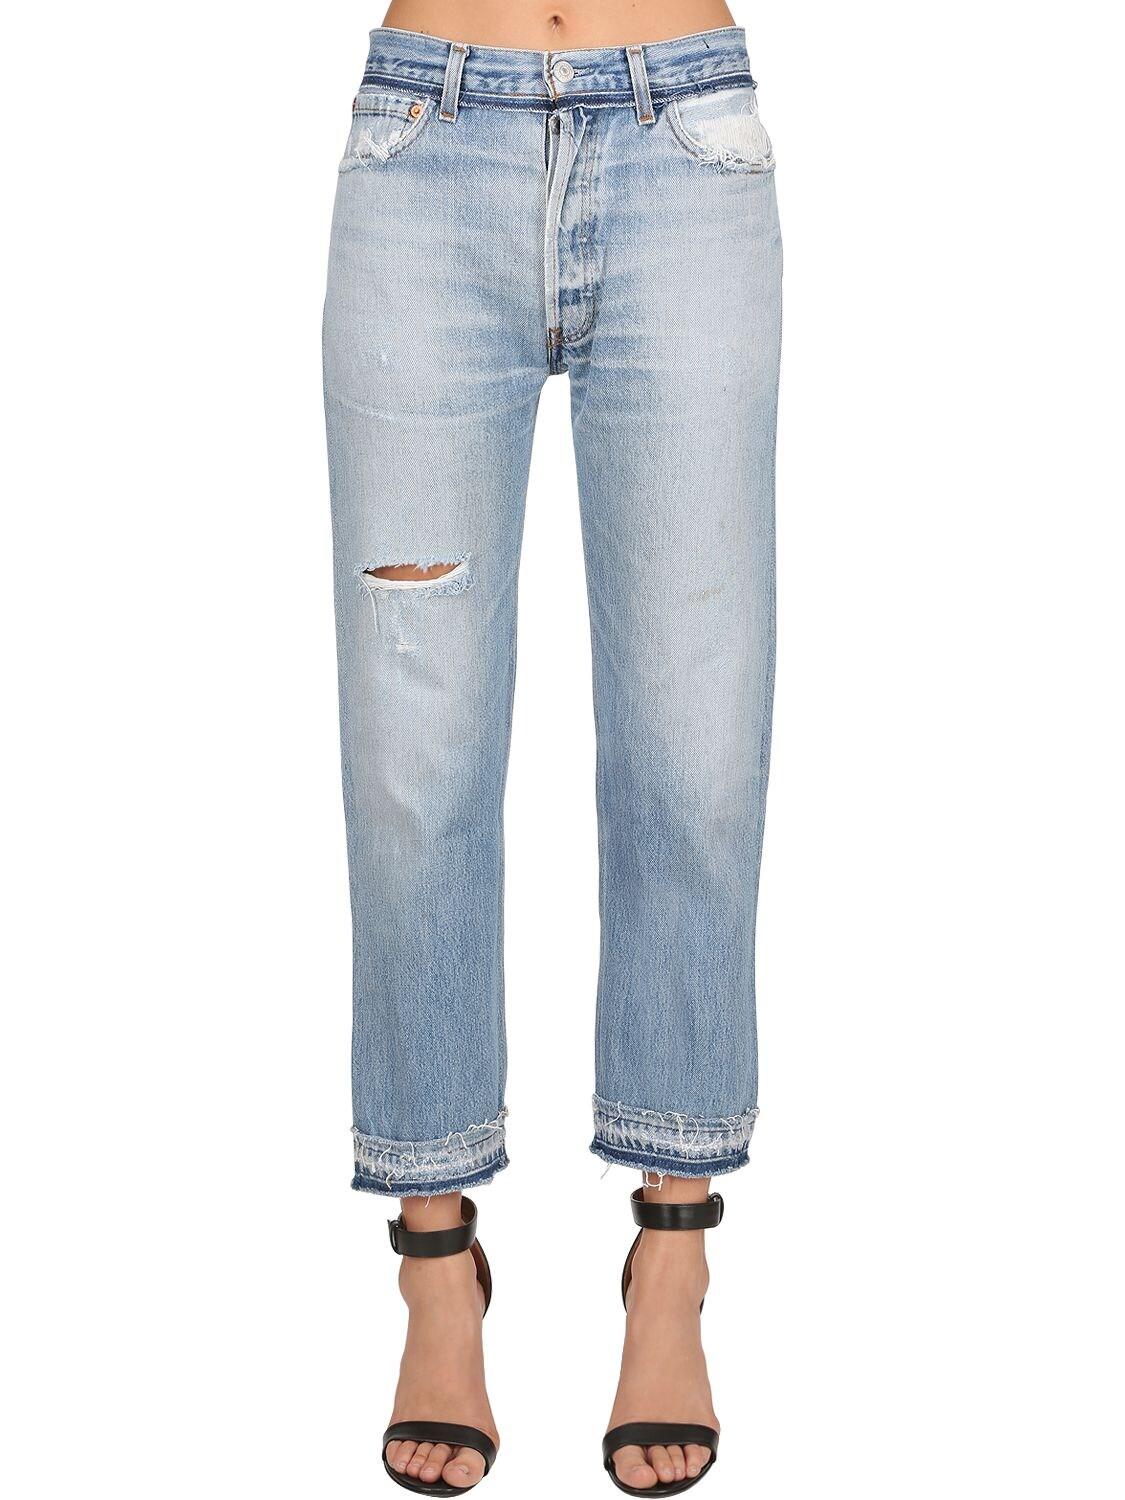 RE/DONE Stove Pipe Vintage Levi's Denim Jeans in Light Blue (Blue) - Lyst